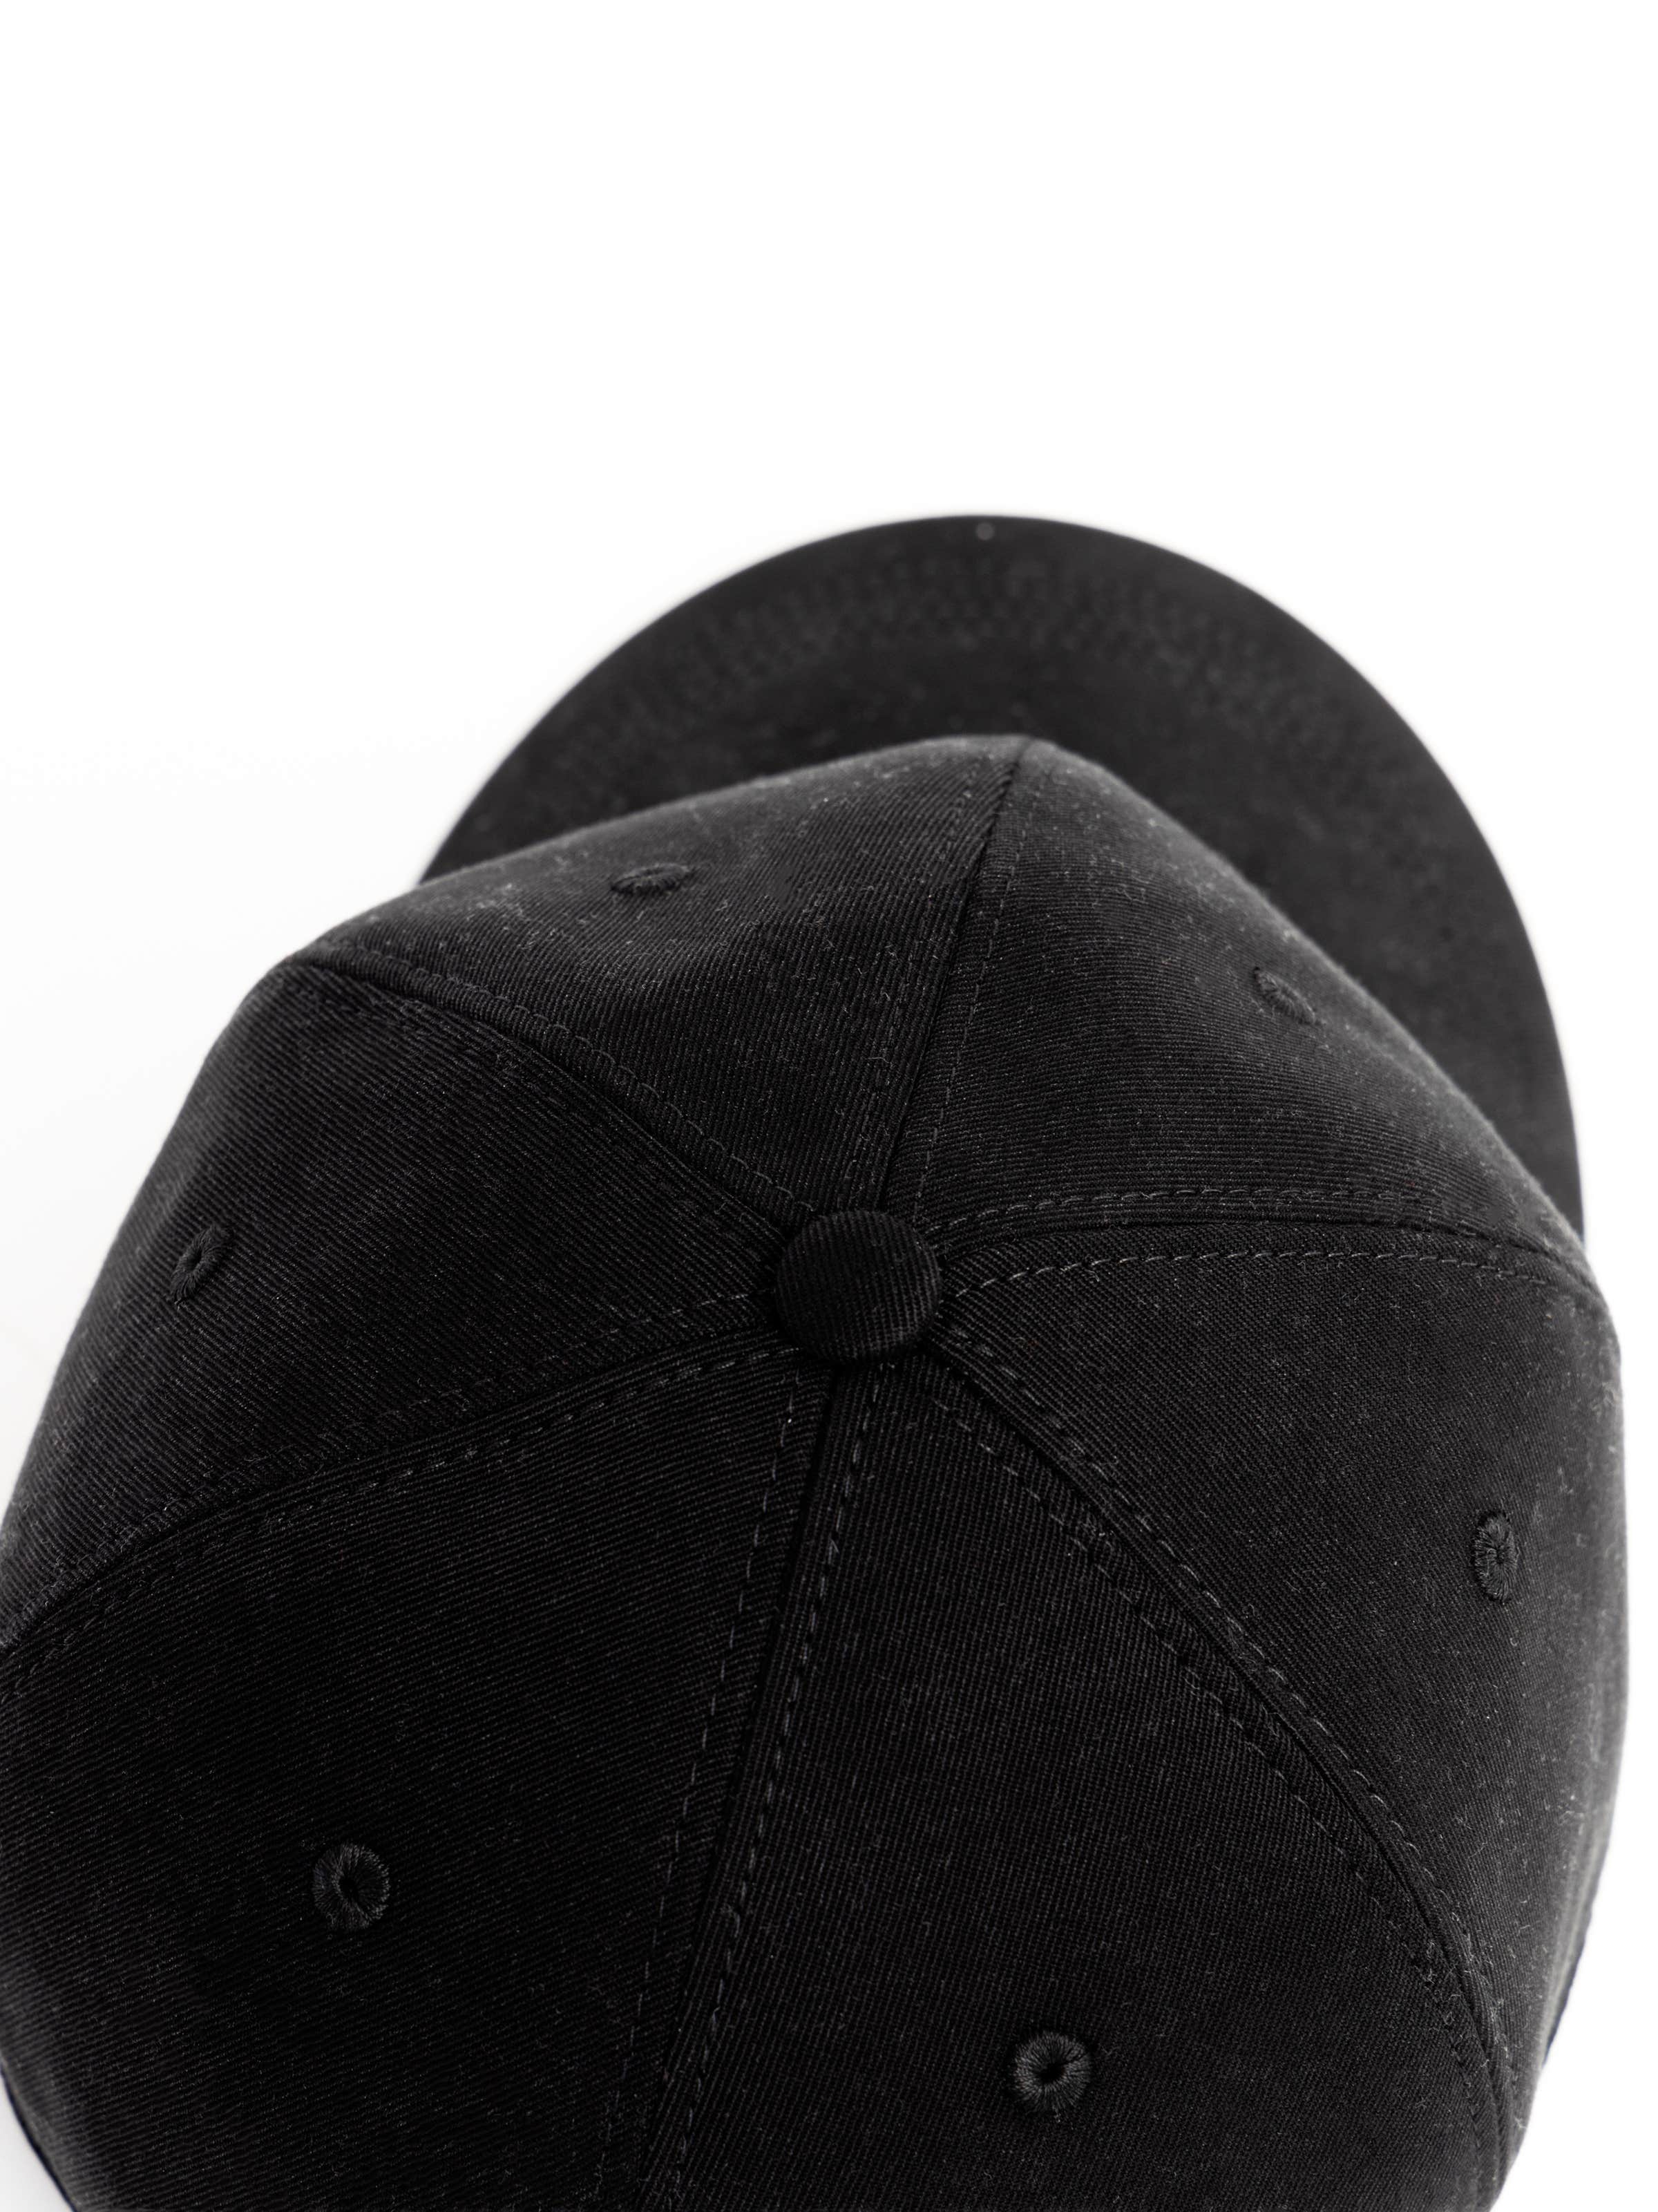 Black Baseball Cap in Twisted Cotton Gabardine with Embroidery